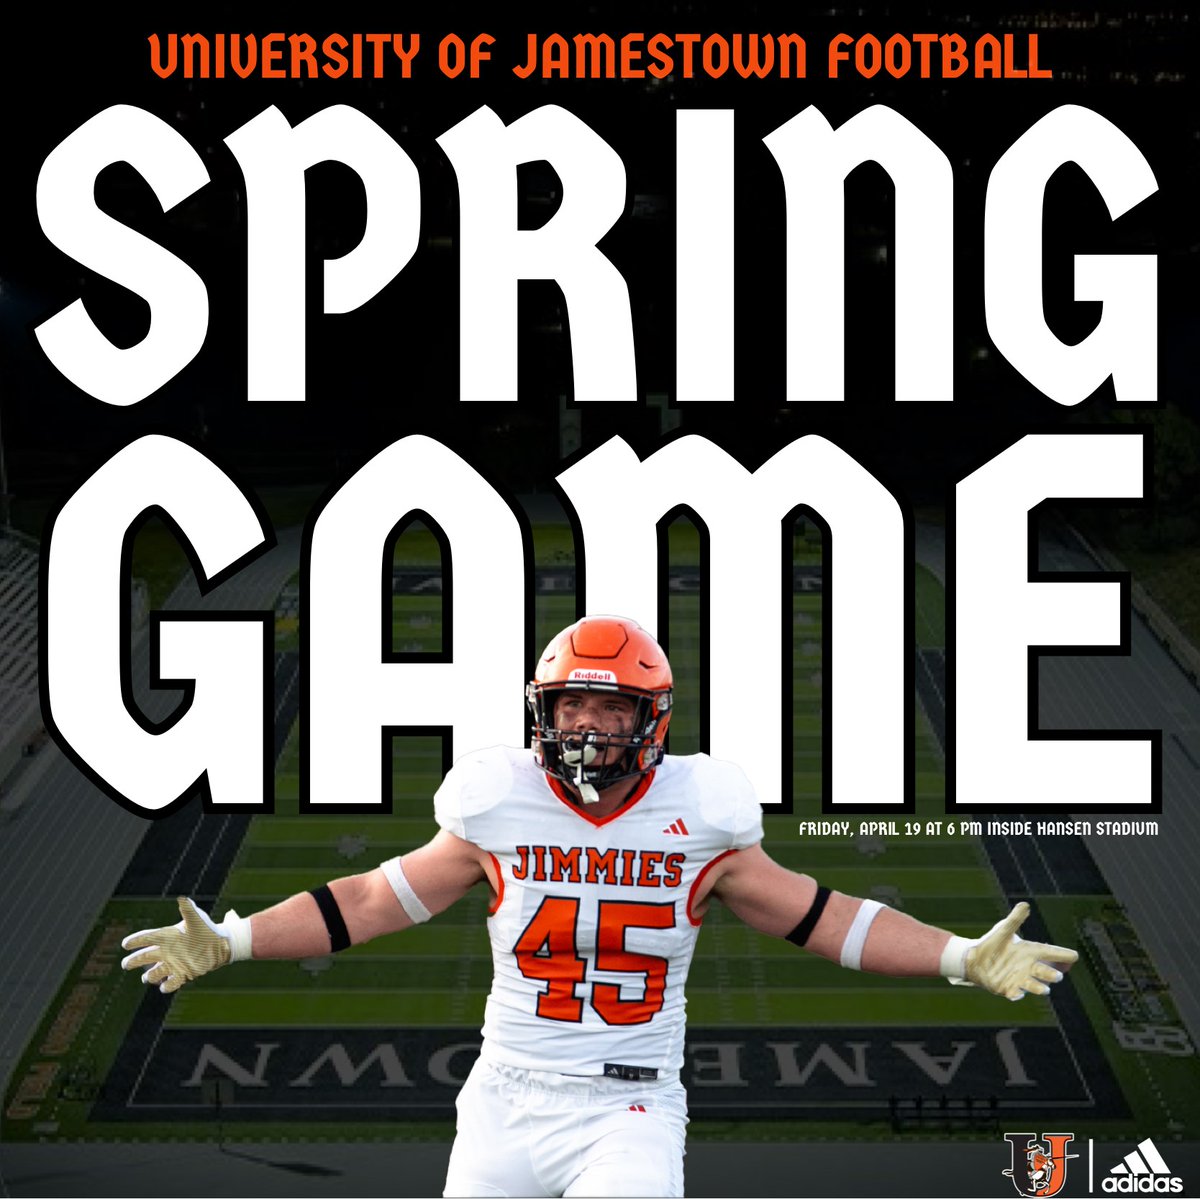 It's the day before... Tomorrow our guys get one last go this spring ‼️ #ChopAndCarry x #JimmiePride